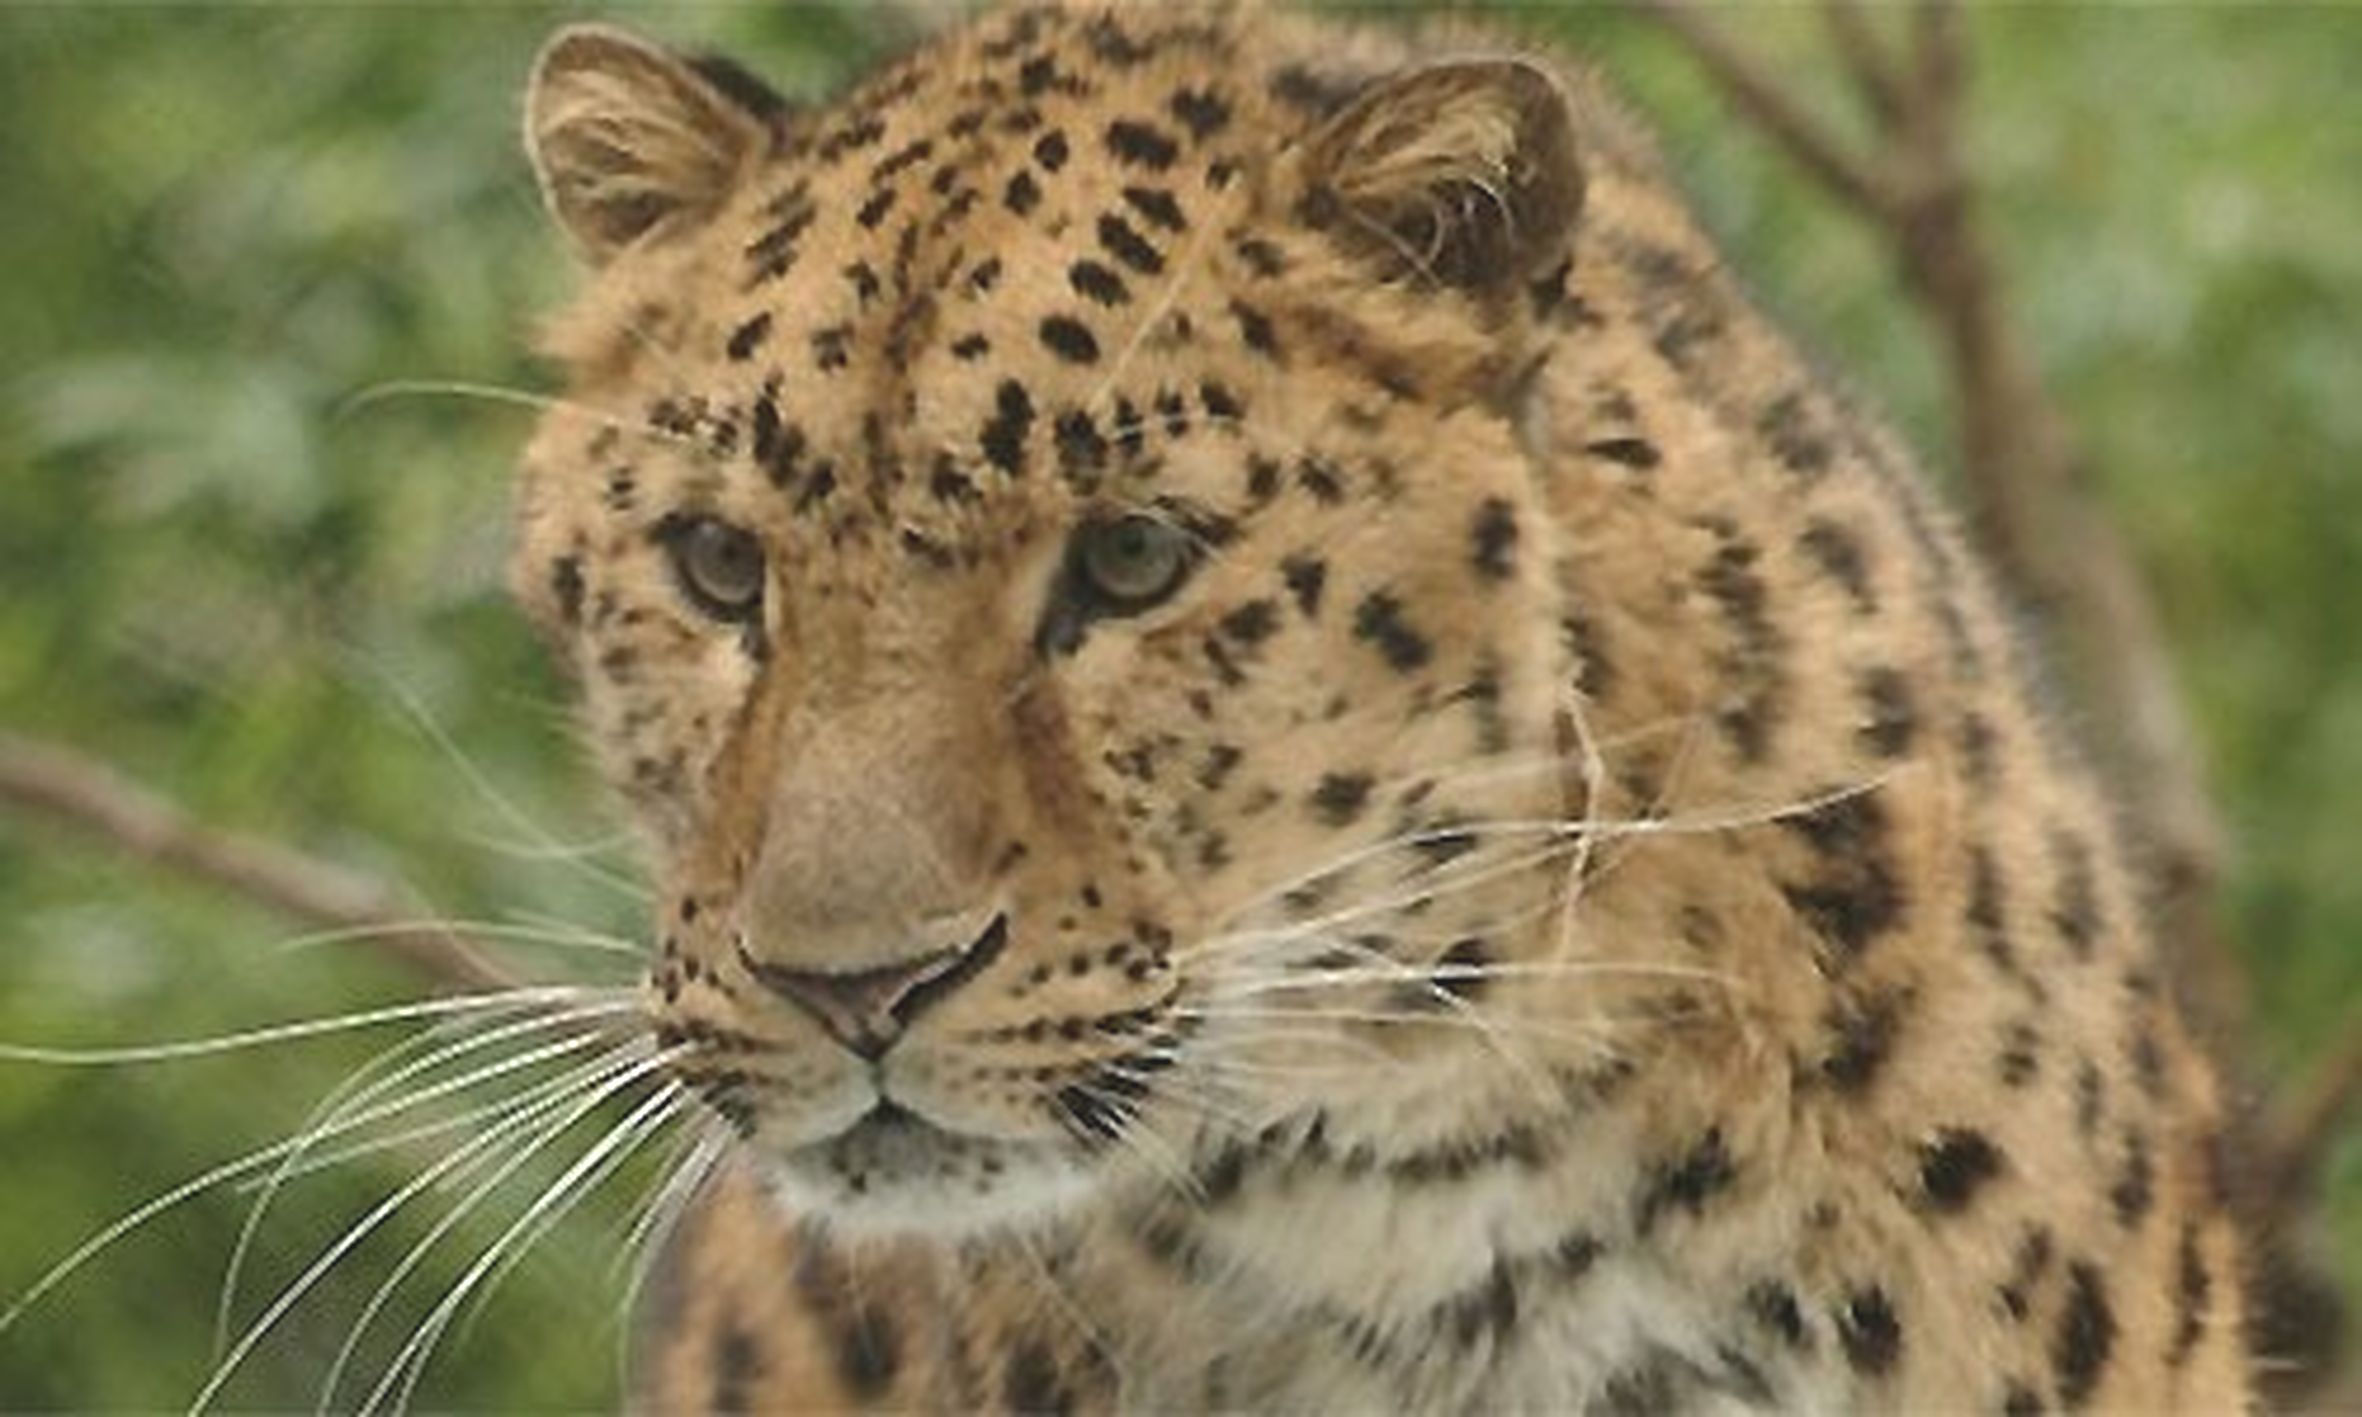 Leopard hunted two cows in two days